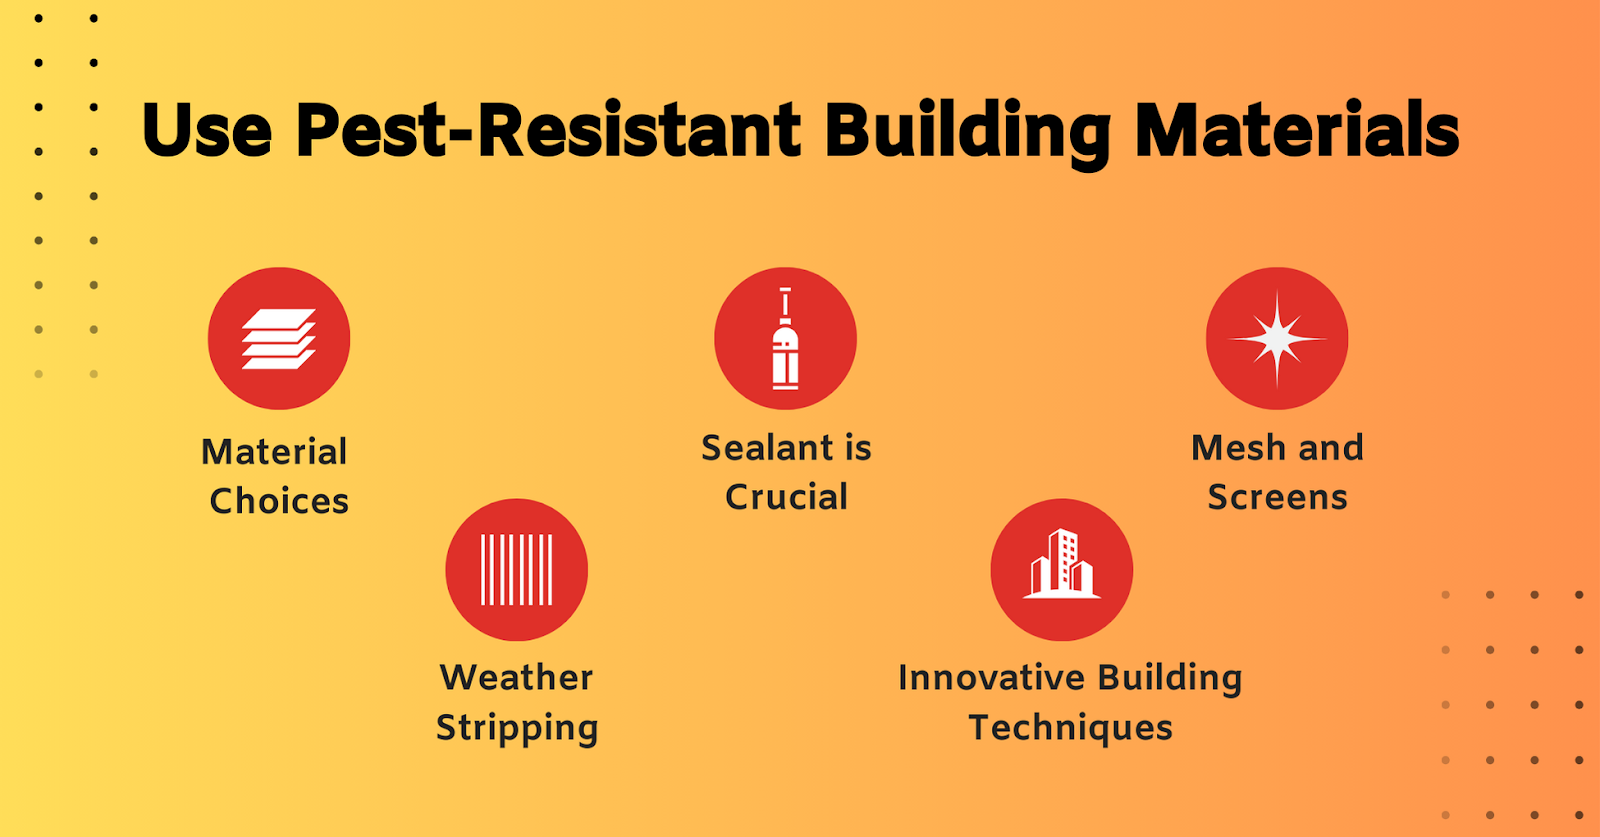 Use Pest-Resistant Building Materials